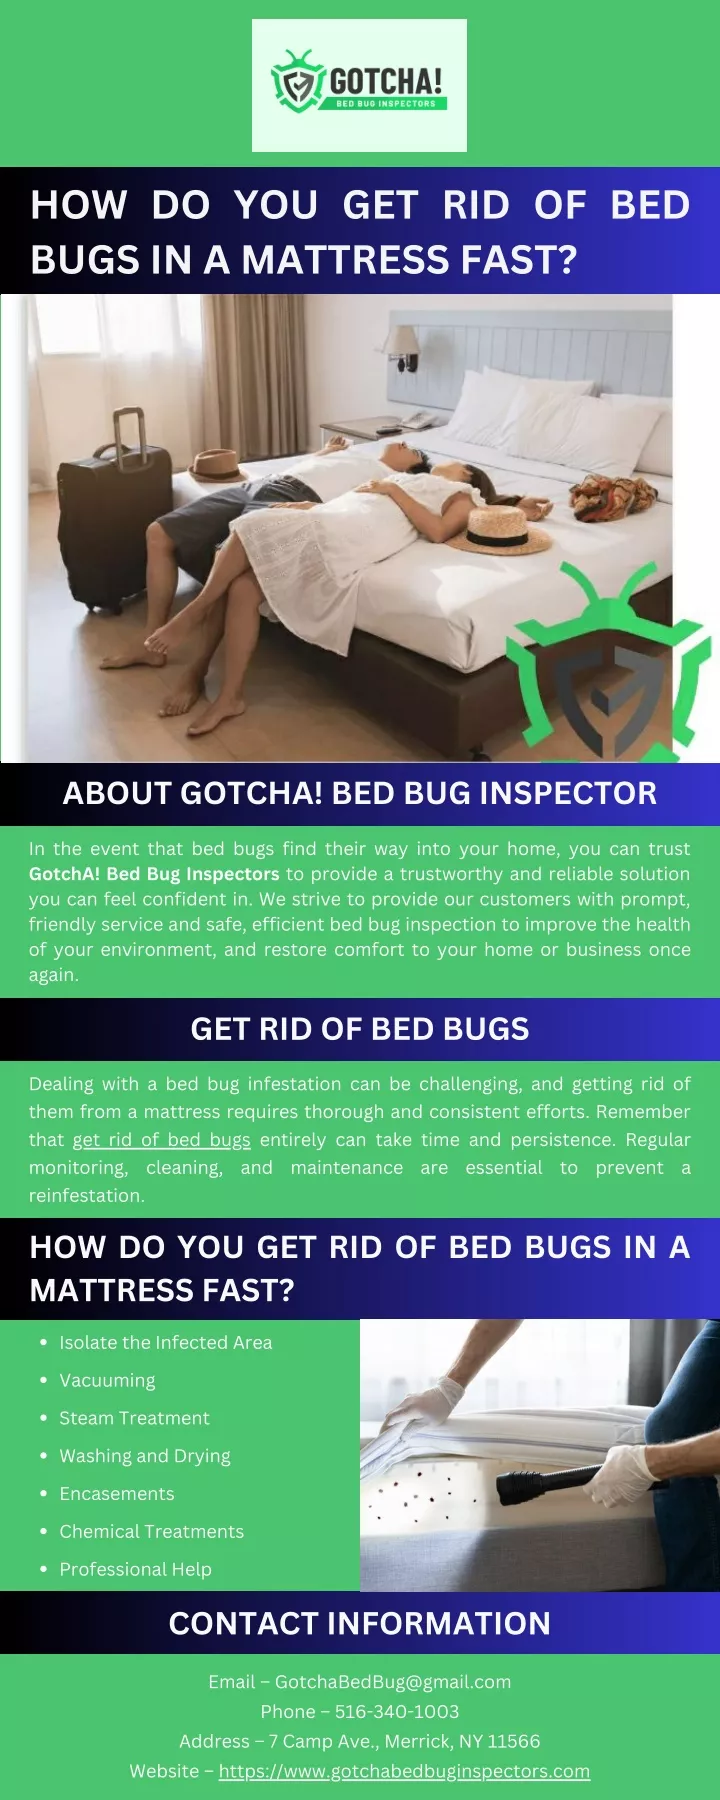 how do you get rid of bed bugs in a mattress fast